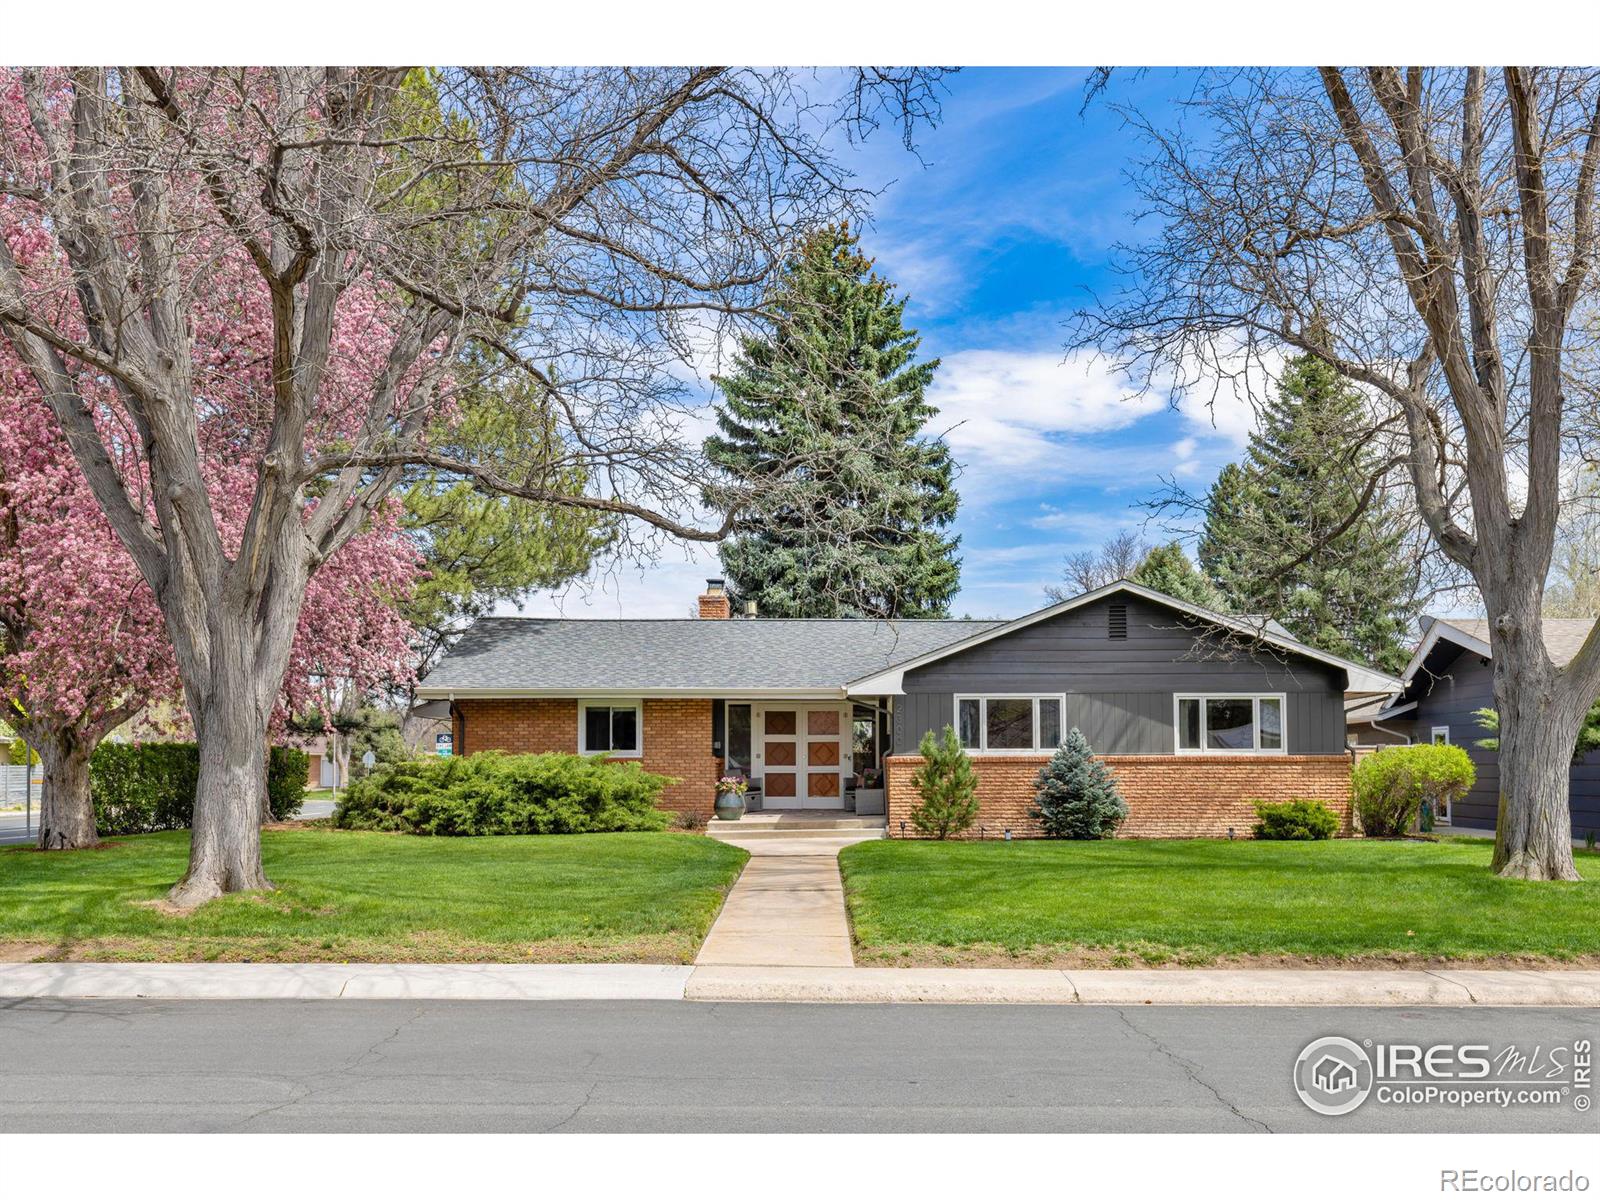 Report Image for 2300  Mathews Street,Fort Collins, Colorado